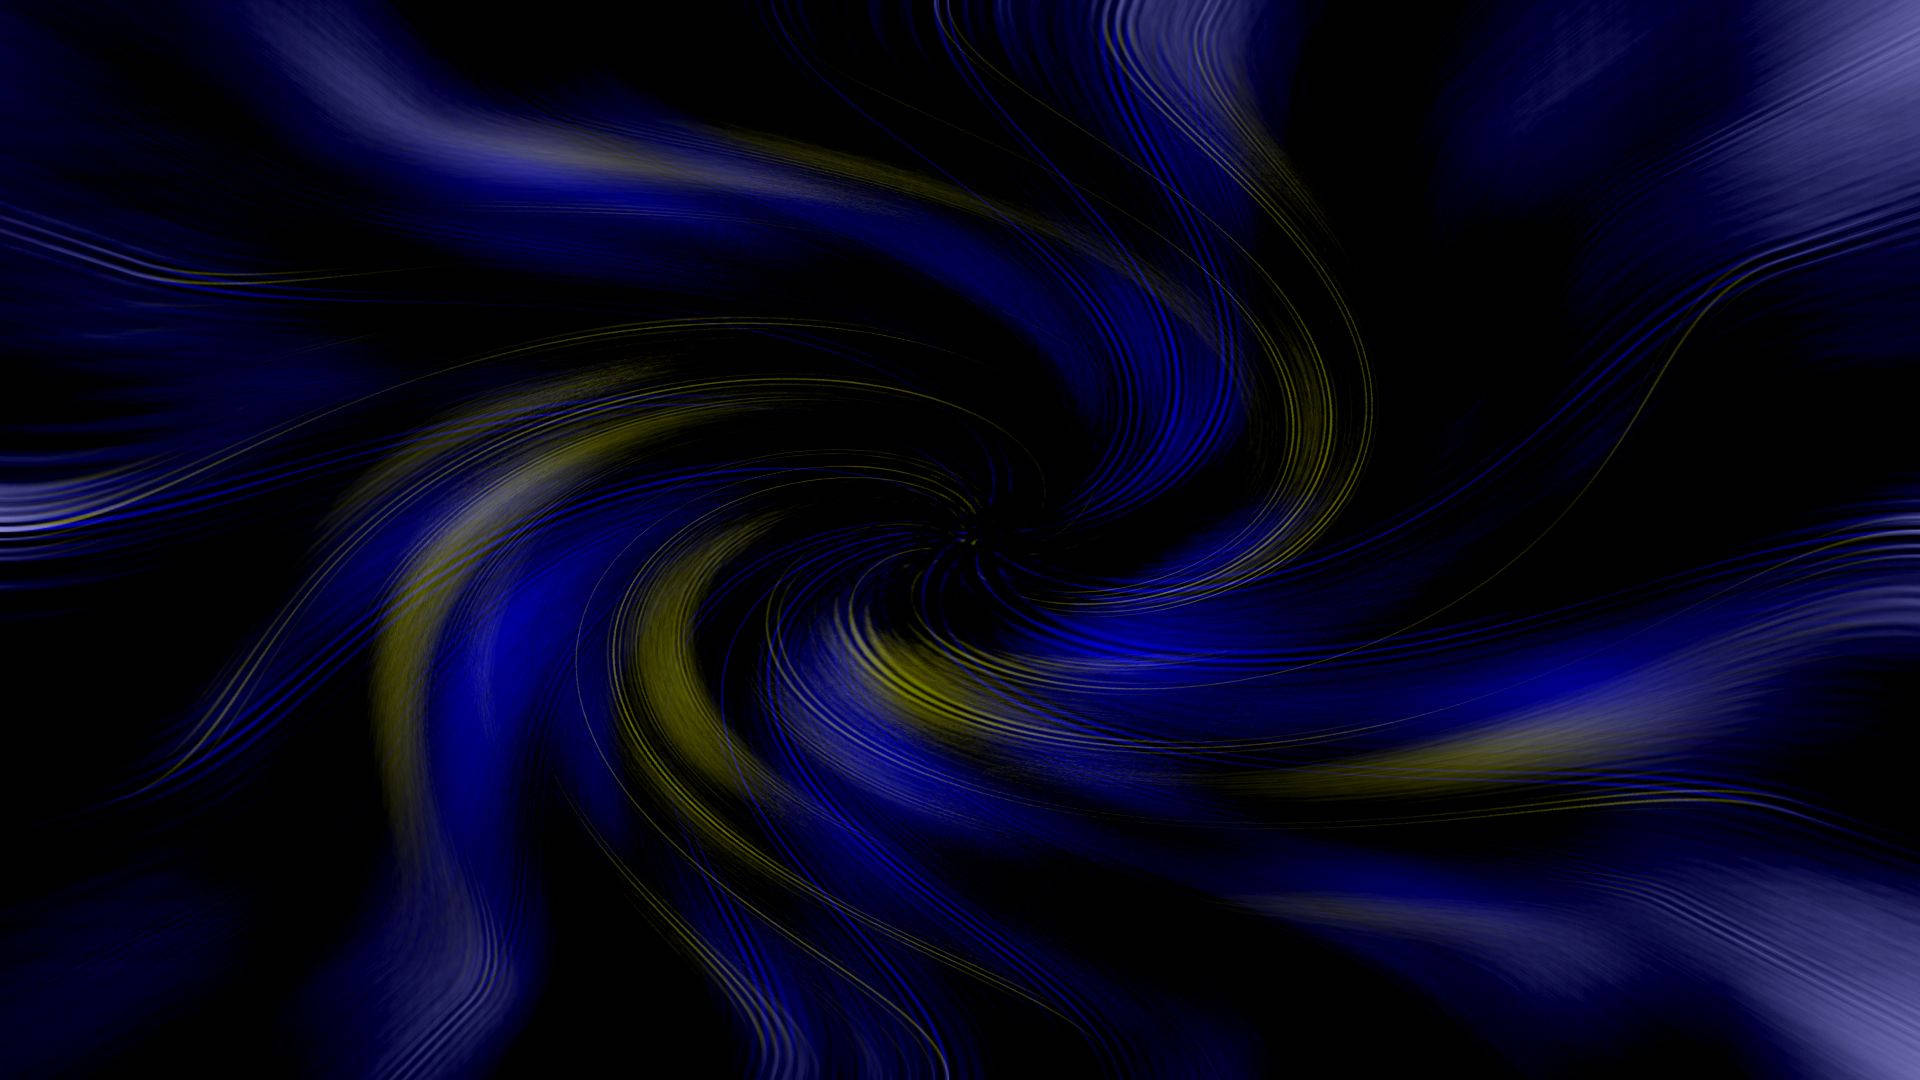 Blue And Gold Swirl